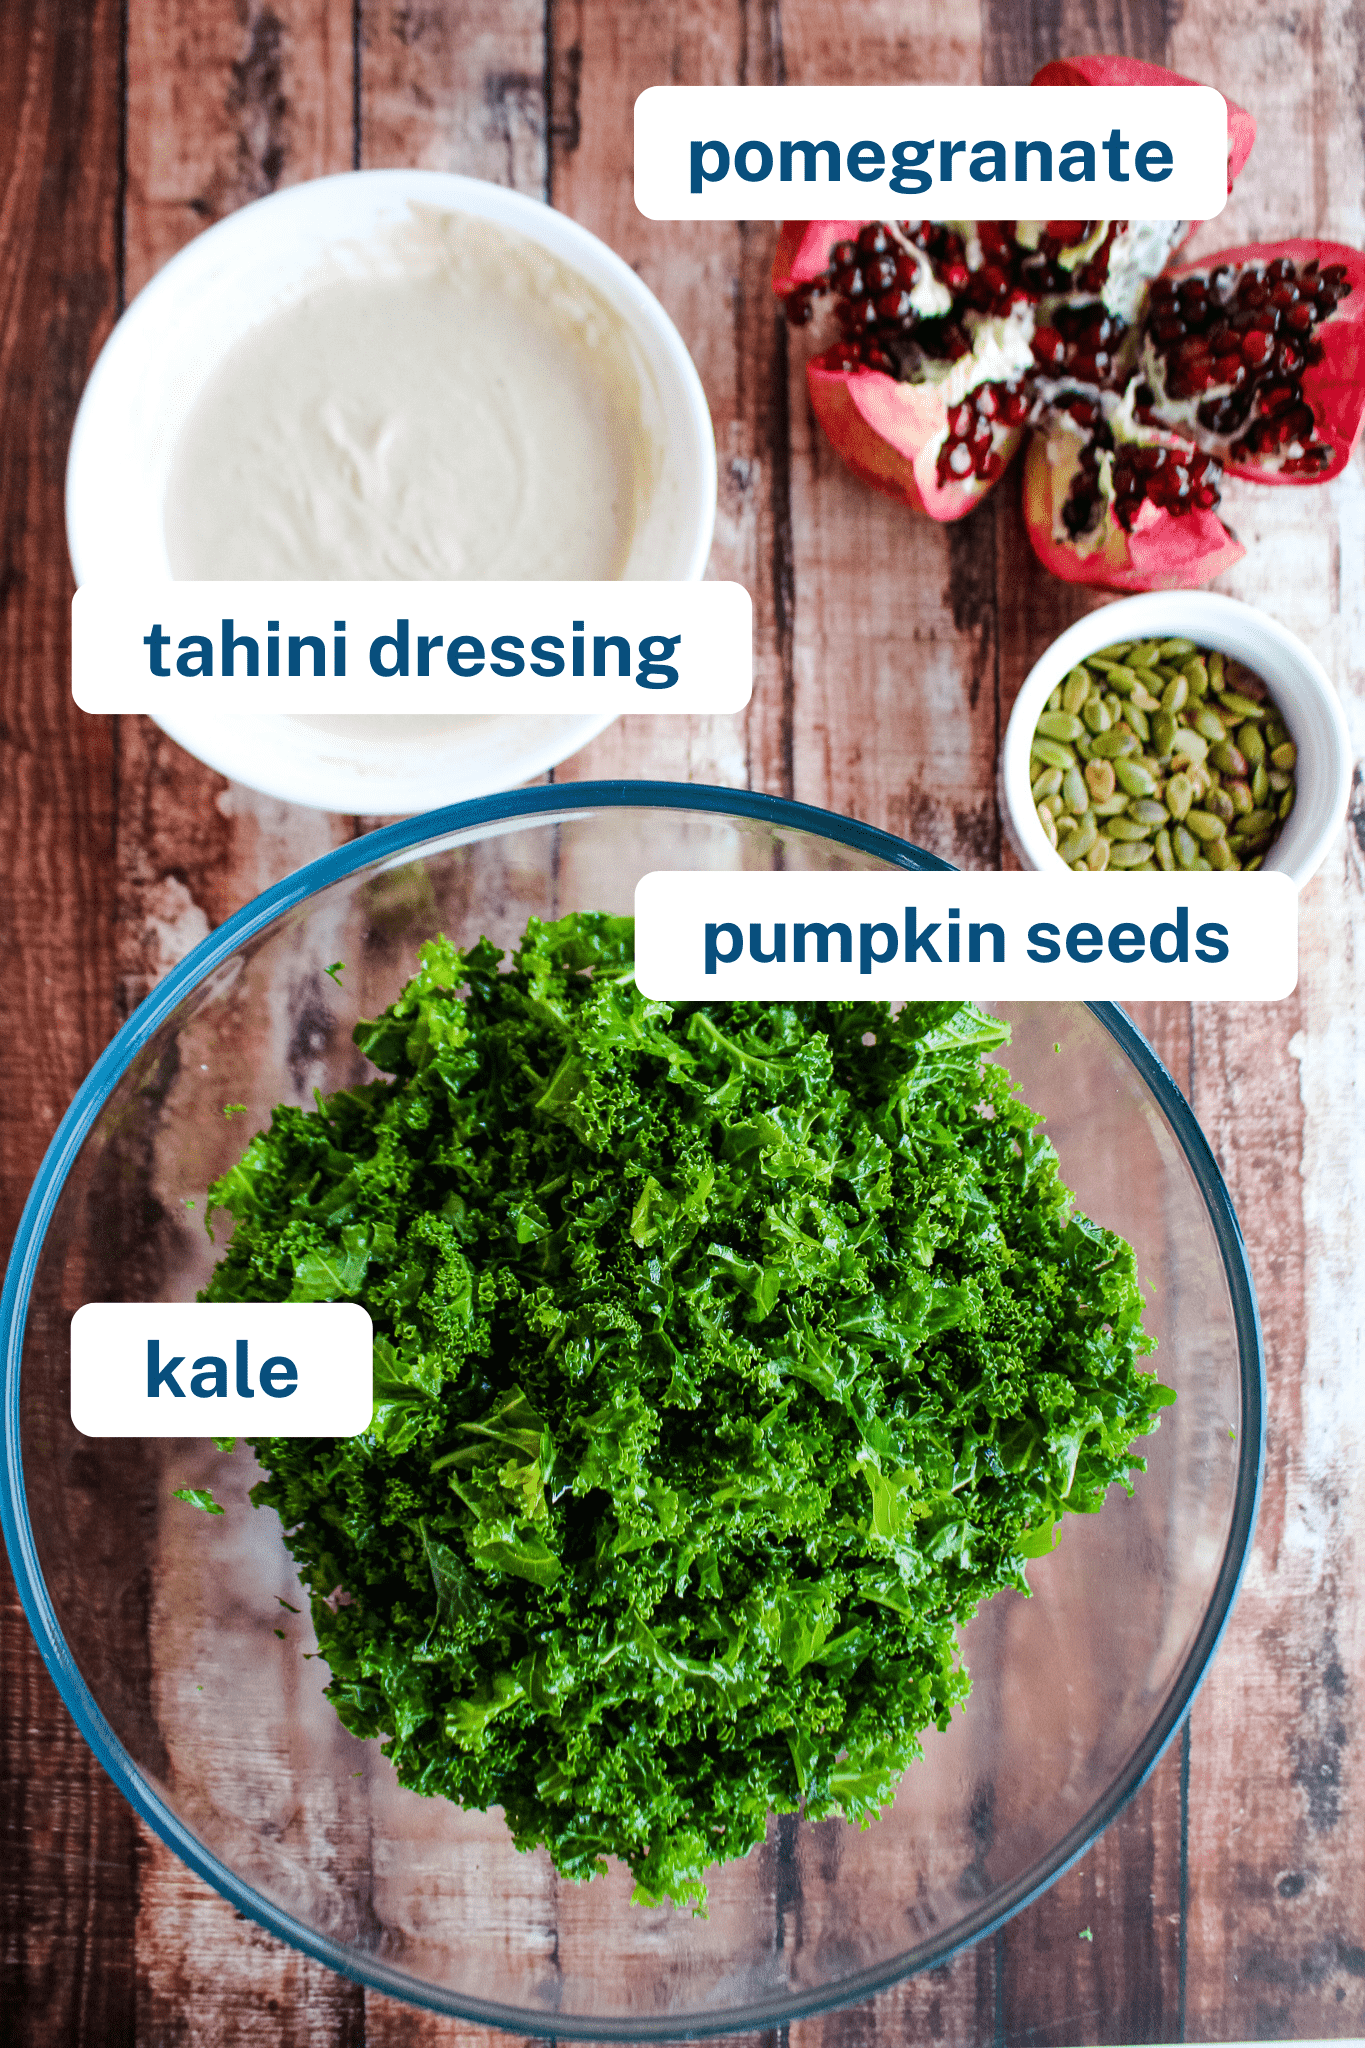 open pomegranate, smooth tahini dressing, pumpkin seeds, and a bowl of massaged kale